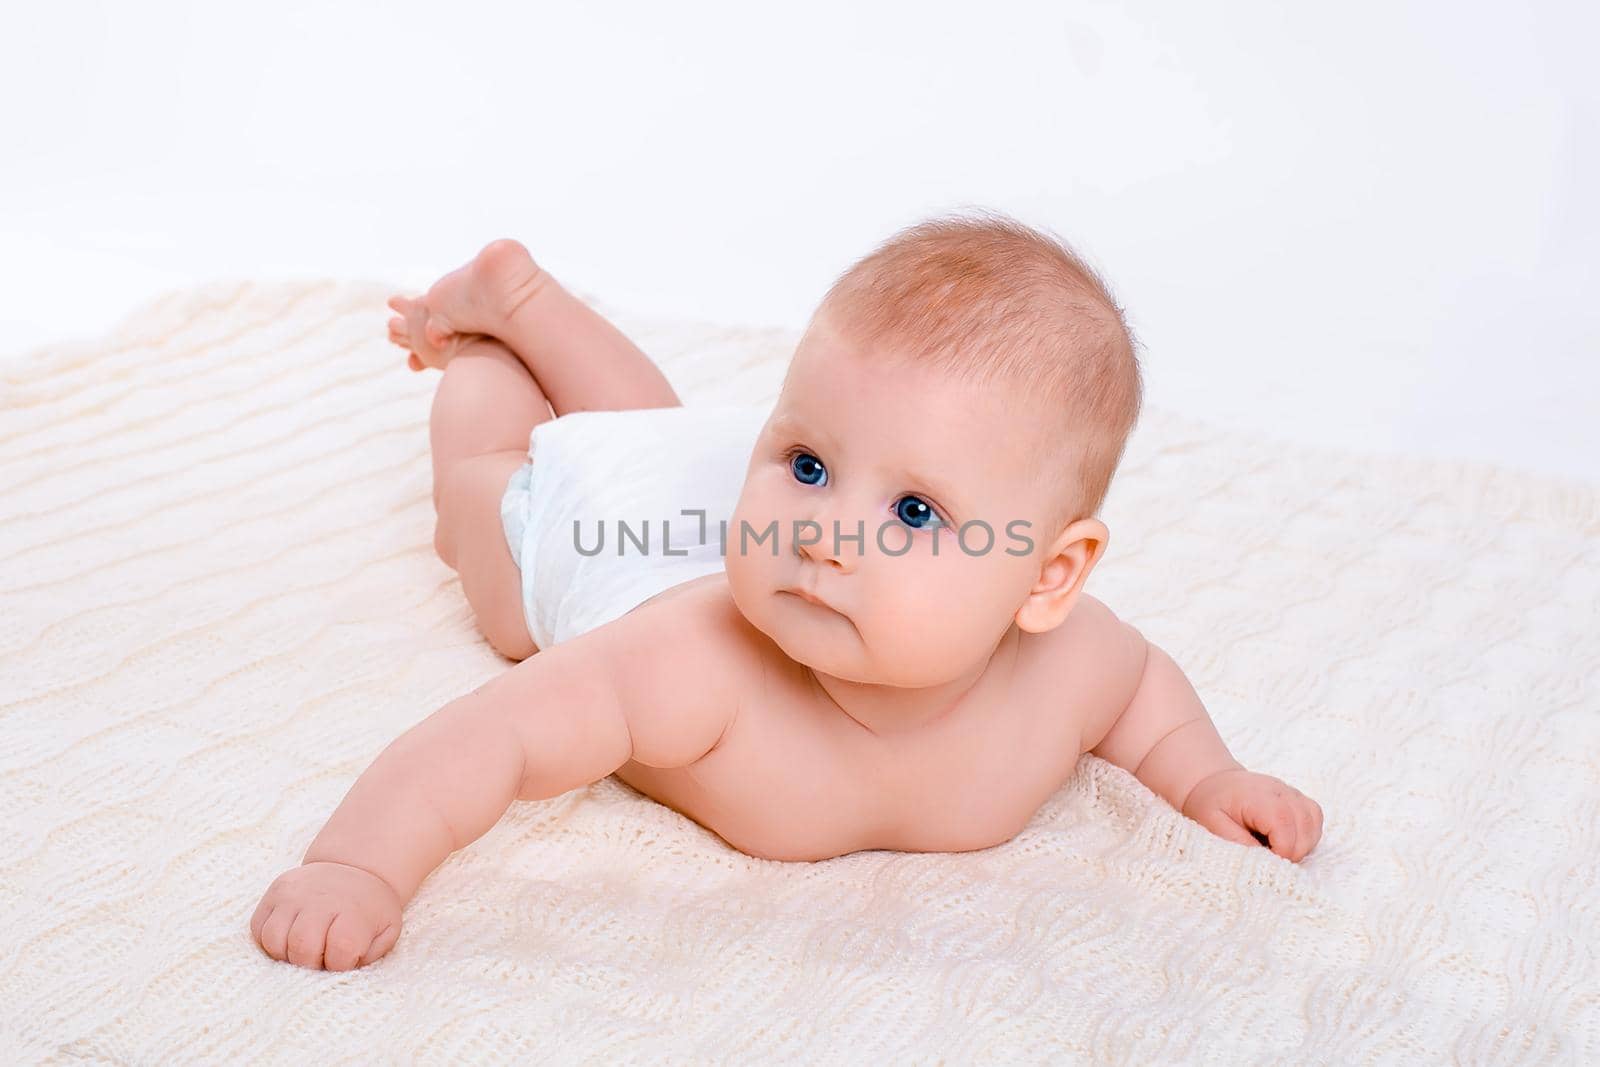 Cute baby girl on white background with isolation. Baby in diaper